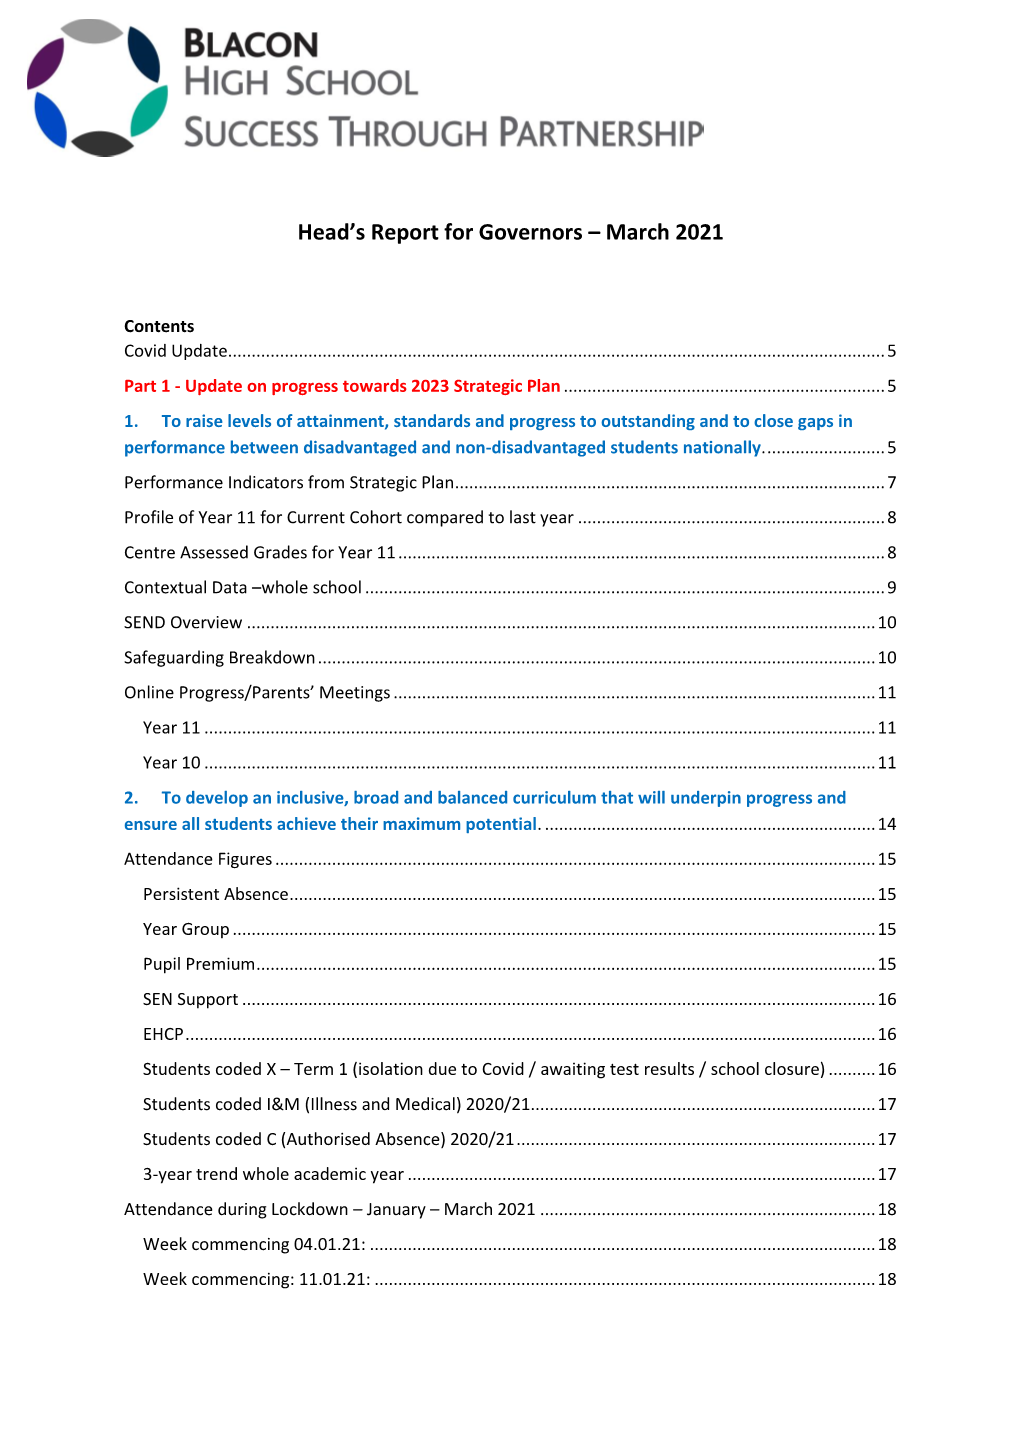 Head's Report for Governors – March 2021